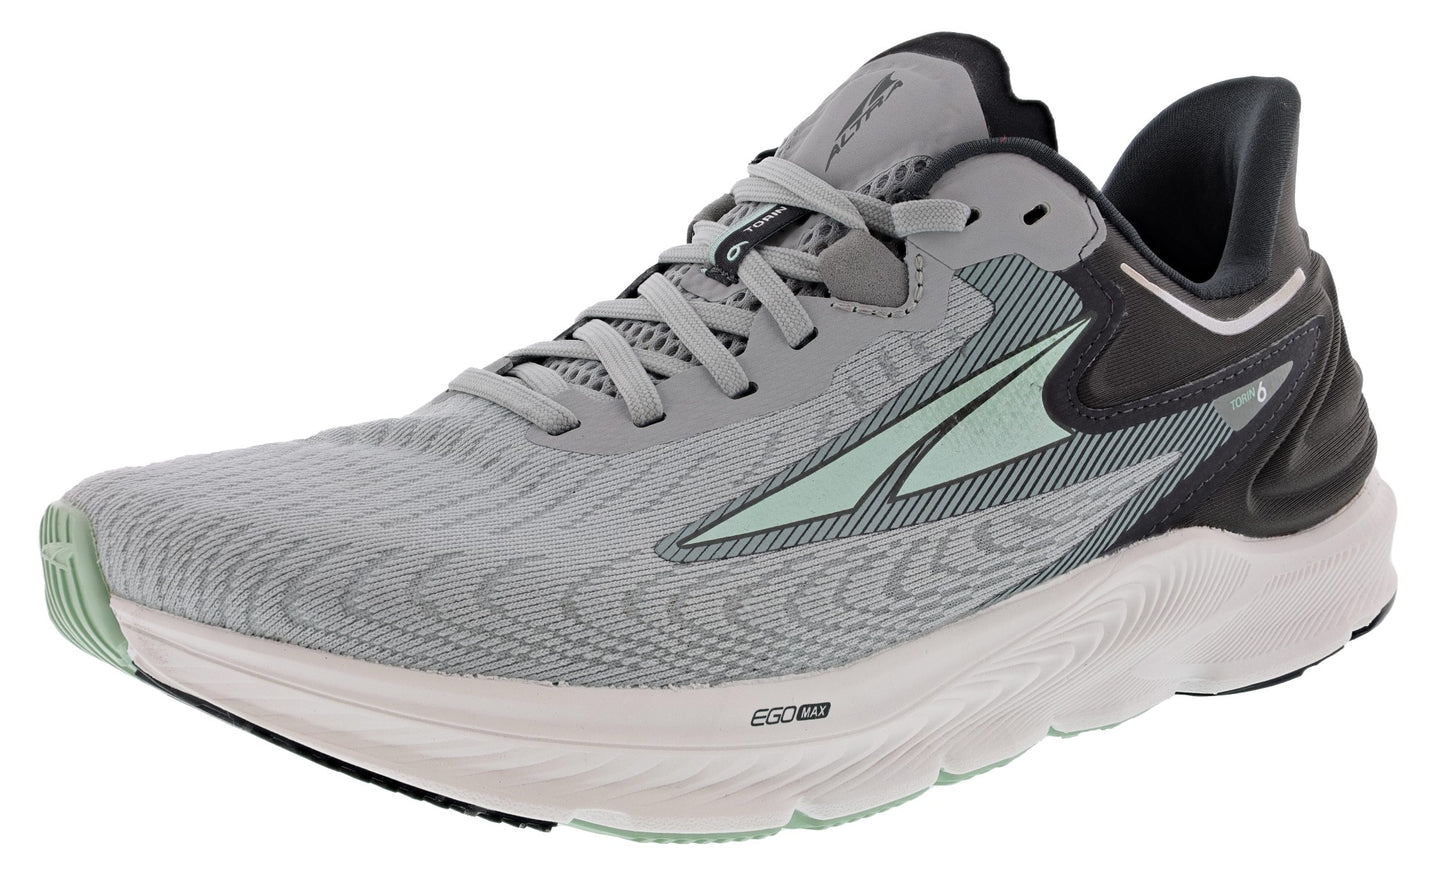 Lateral of Gray Altra Women’s Torin 6 Road Running Shoes